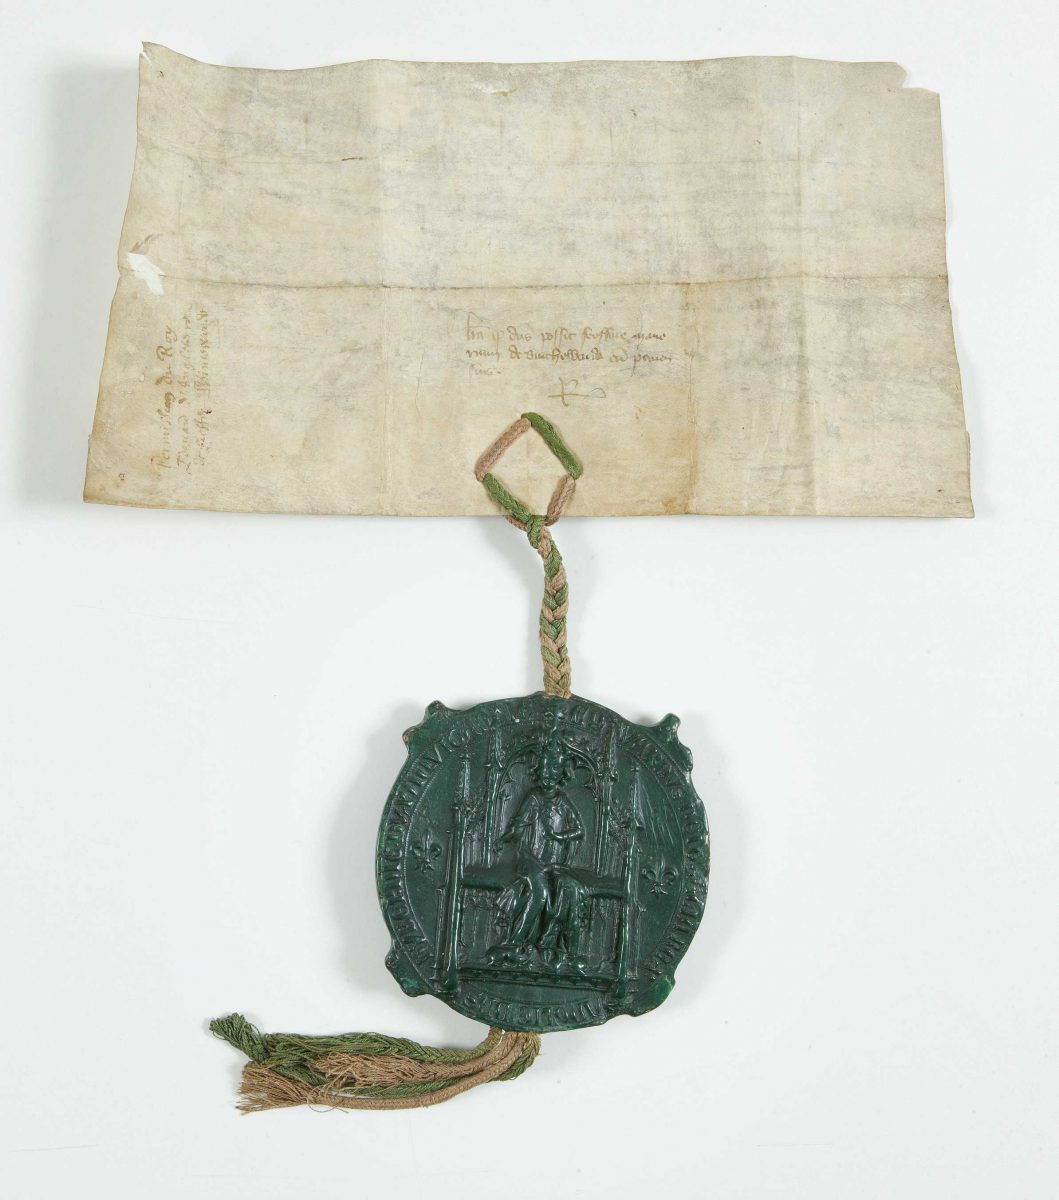 Charter of Edward the Third, confirming the Archbishop of Rouen as the owner of Bentworth